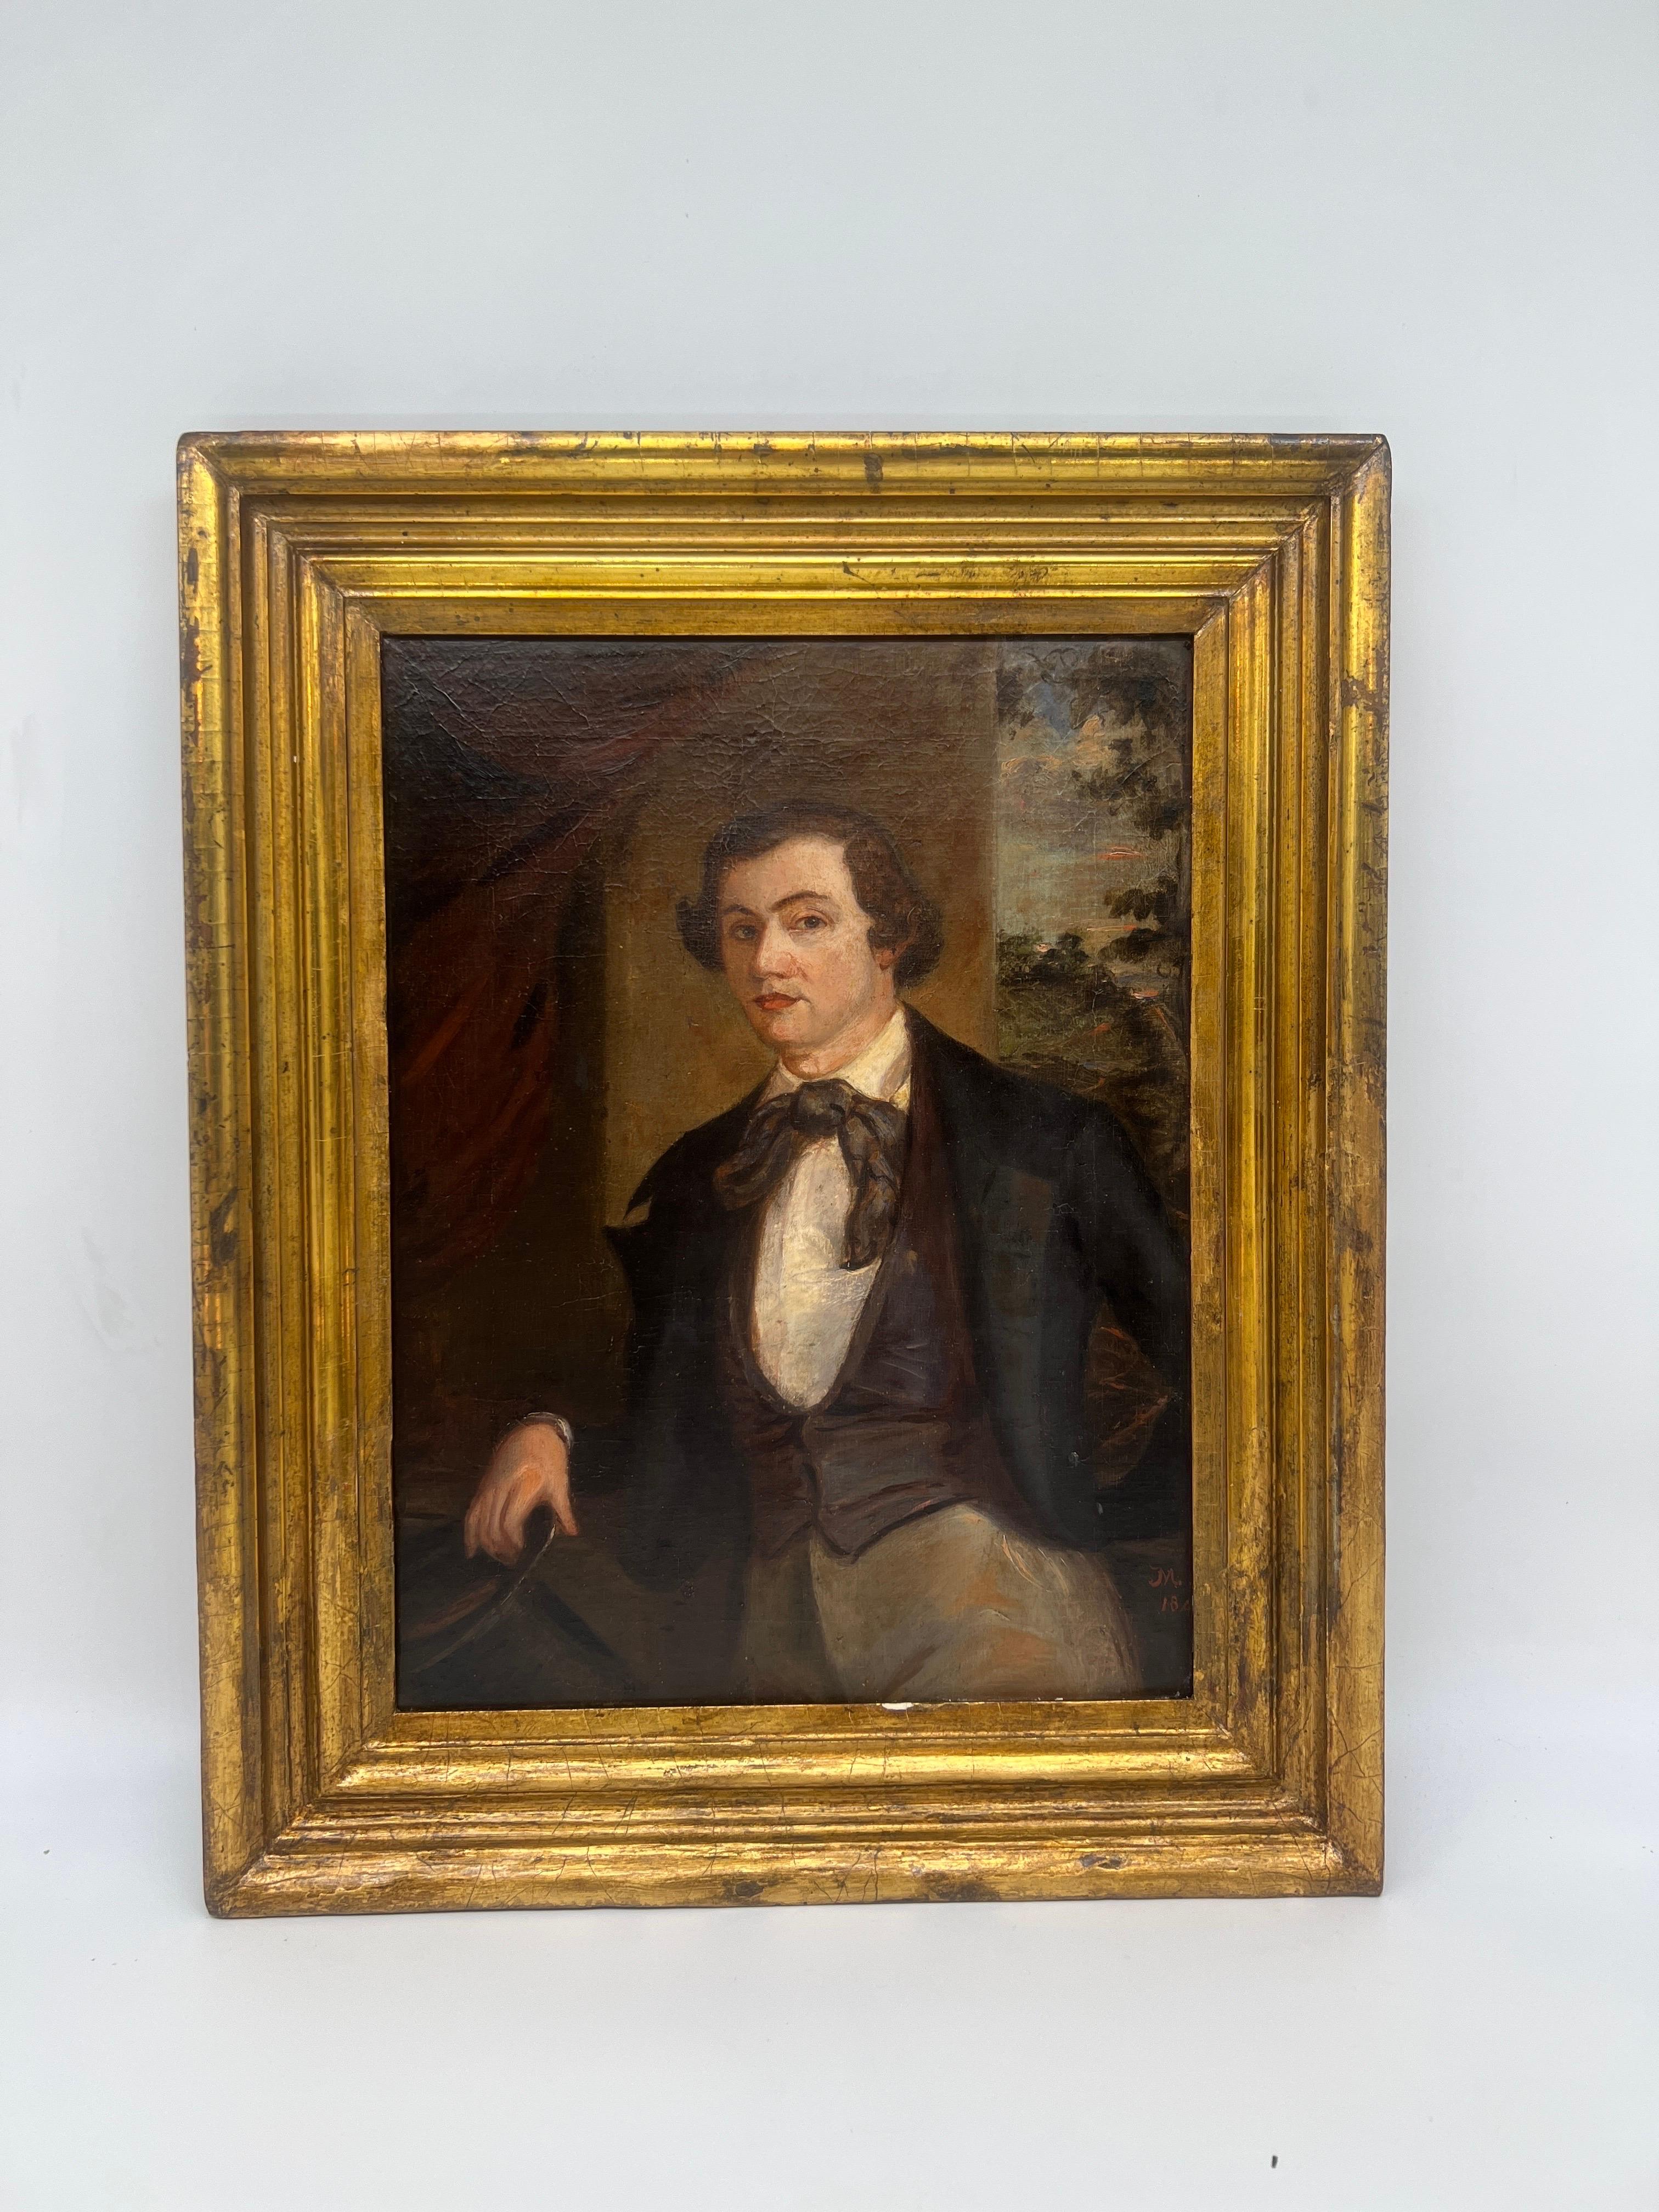 American Southern School O/B Portrait of a Gentleman Circa 1842.
A fine quality portrait of a gentleman, likely a Jockey or businessman. From an important southern portrait collection. Signed to the lower right possibly “J.M , 1842”.